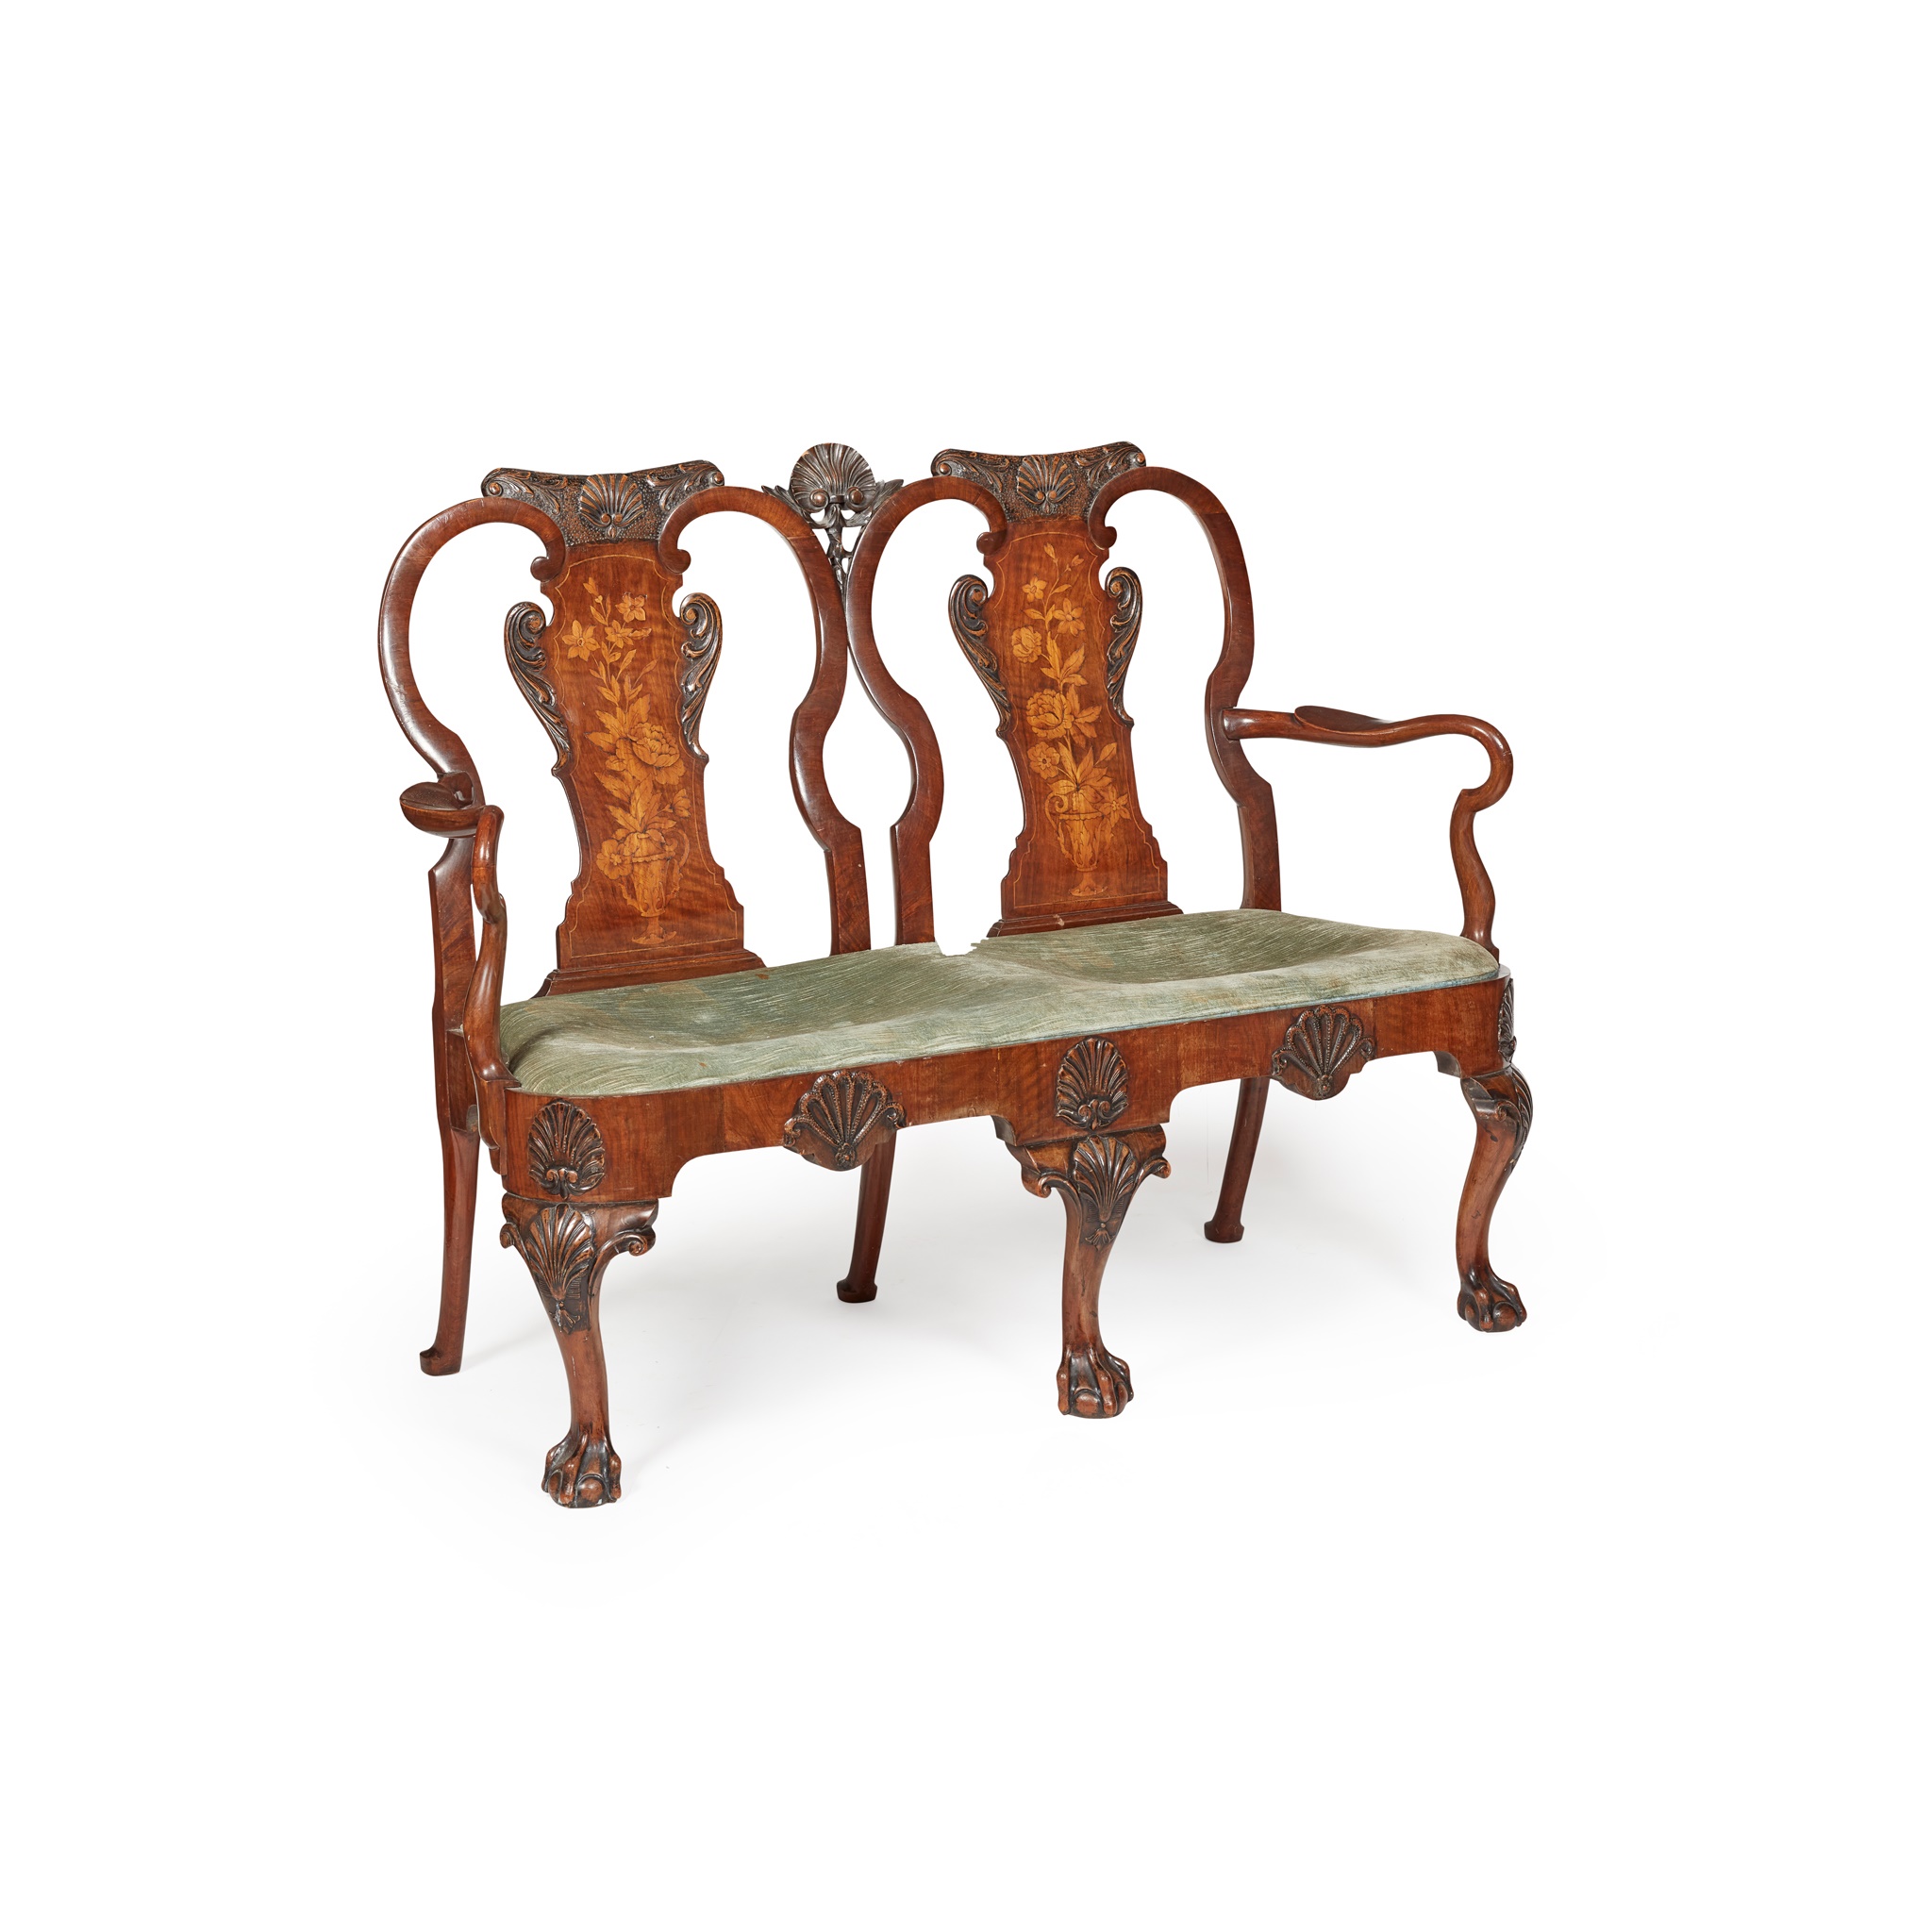 GEORGE I STYLE WALNUT AND MARQUETRY DOUBLE CHAIRBACK SETTEE 19TH CENTURY - Image 2 of 2